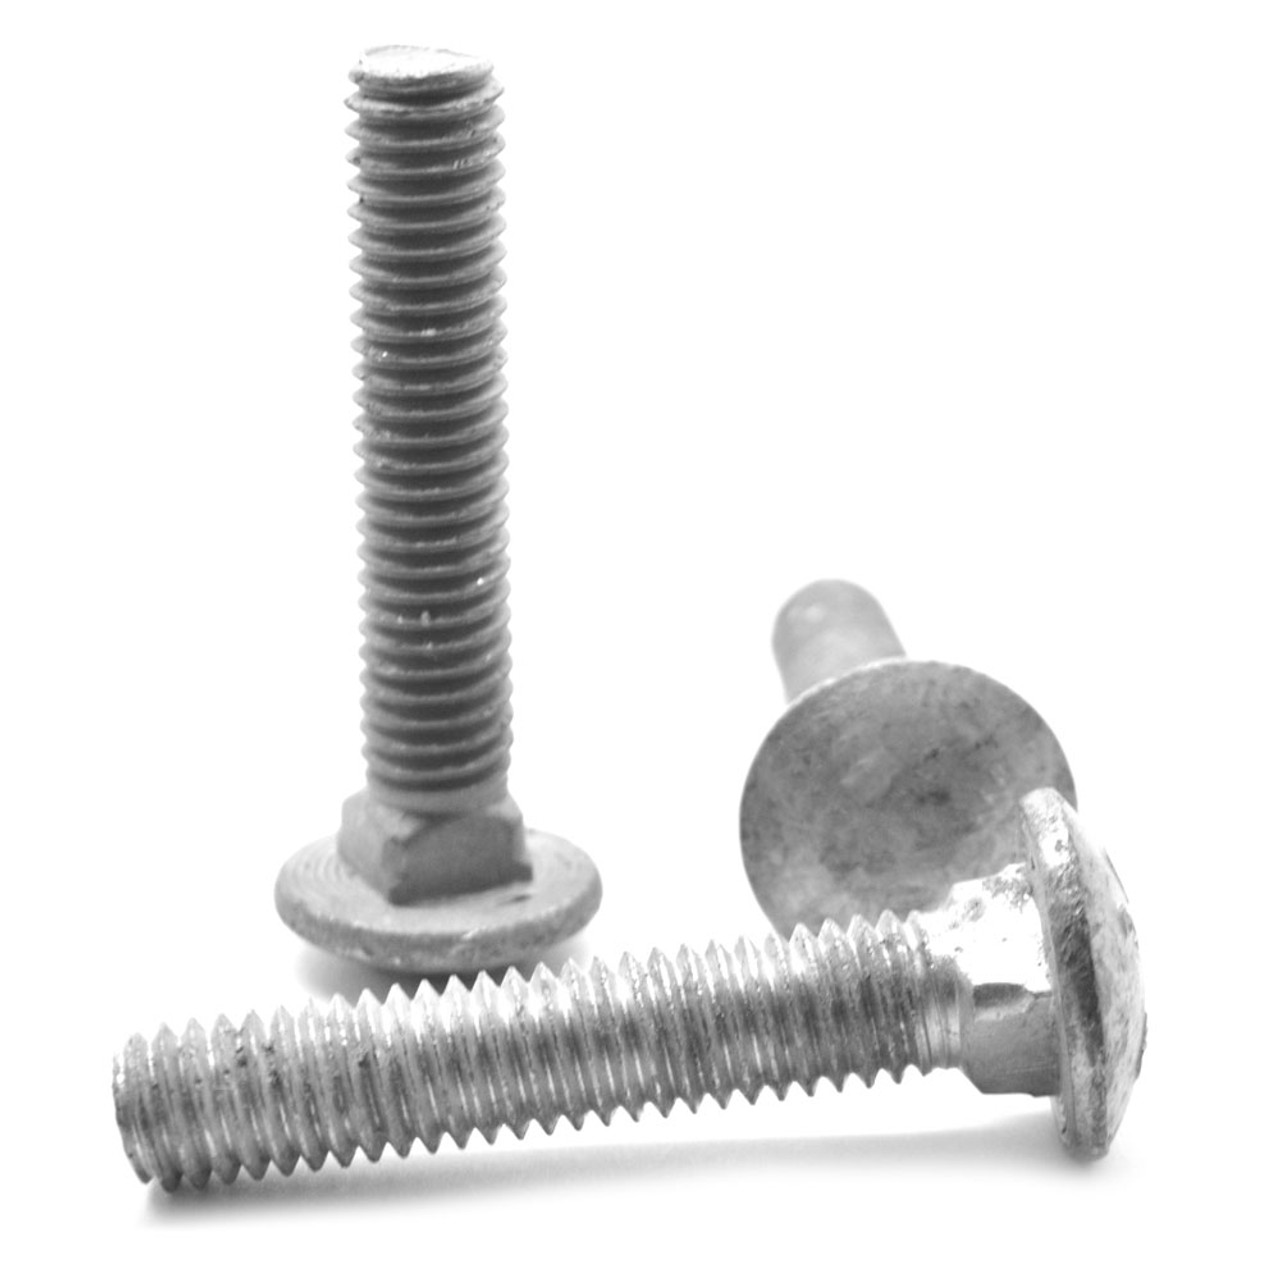 1/2"-13 x 5 1/2" (FT) Coarse Thread A307 Grade A Carriage Bolt Low Carbon Steel Hot Dip Galvanized